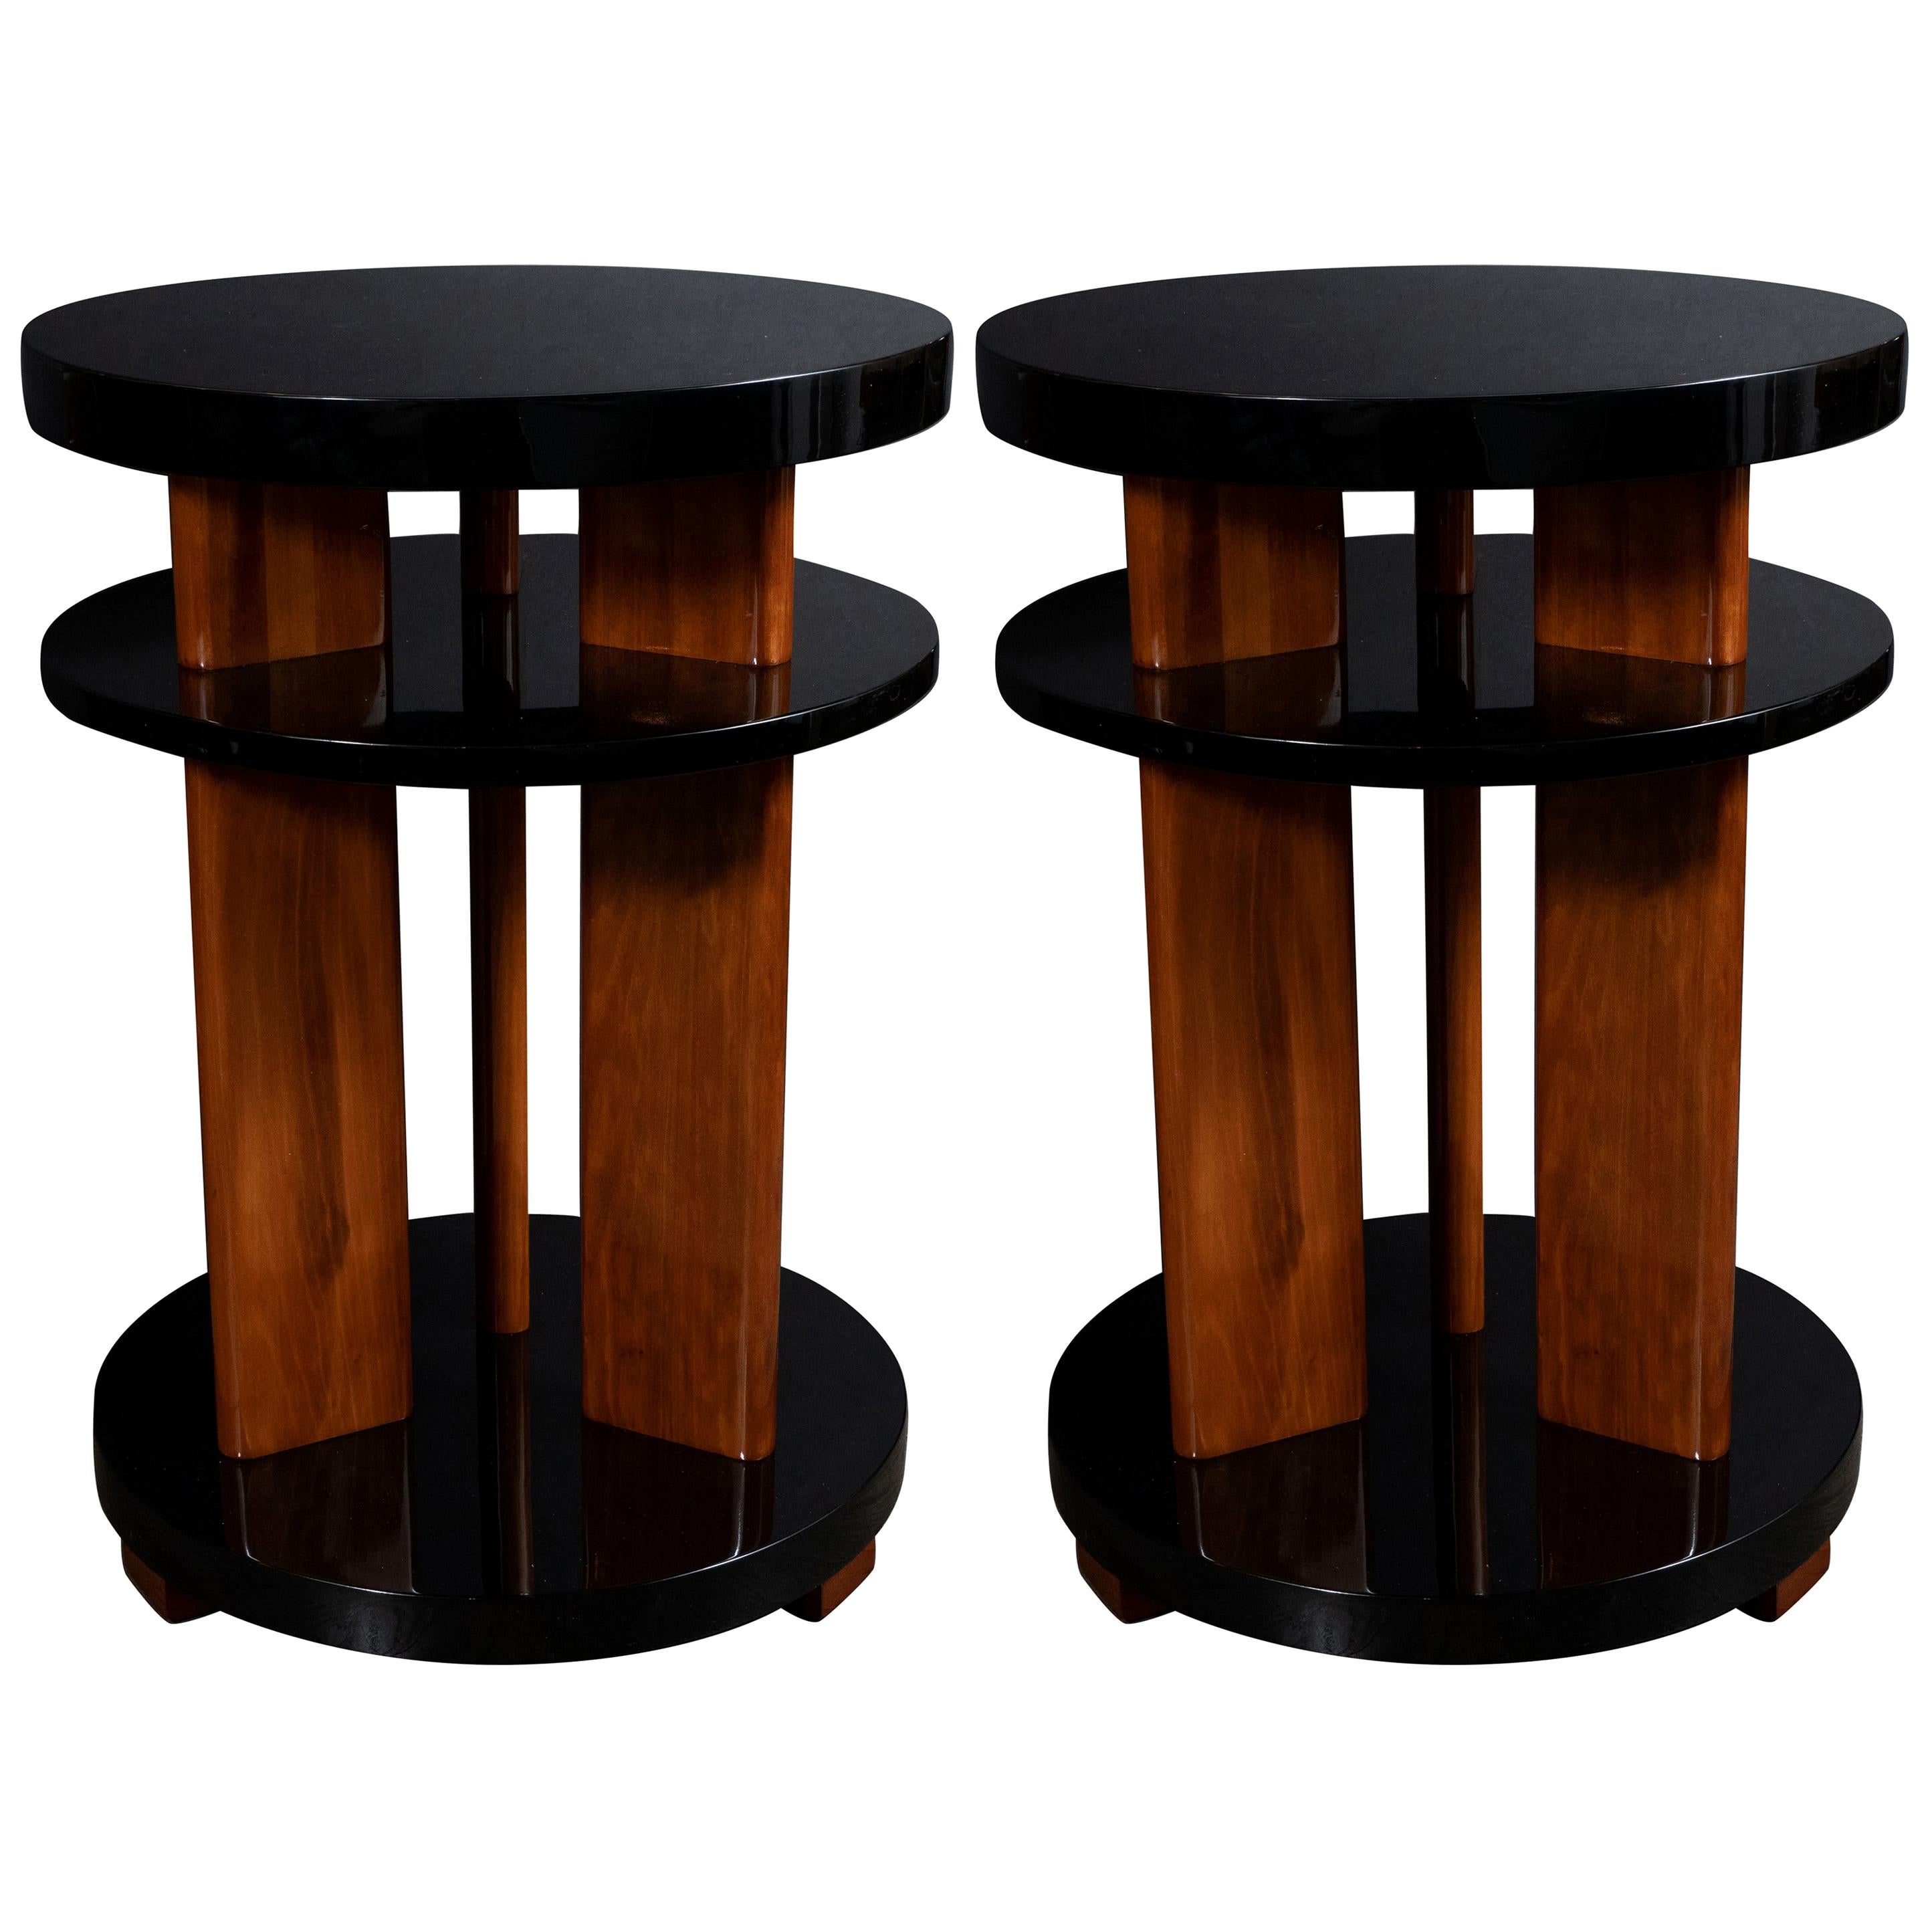 Pair of Art Deco Machine Age Lacquer & Walnut Three Tier Side/ Occasional Tables